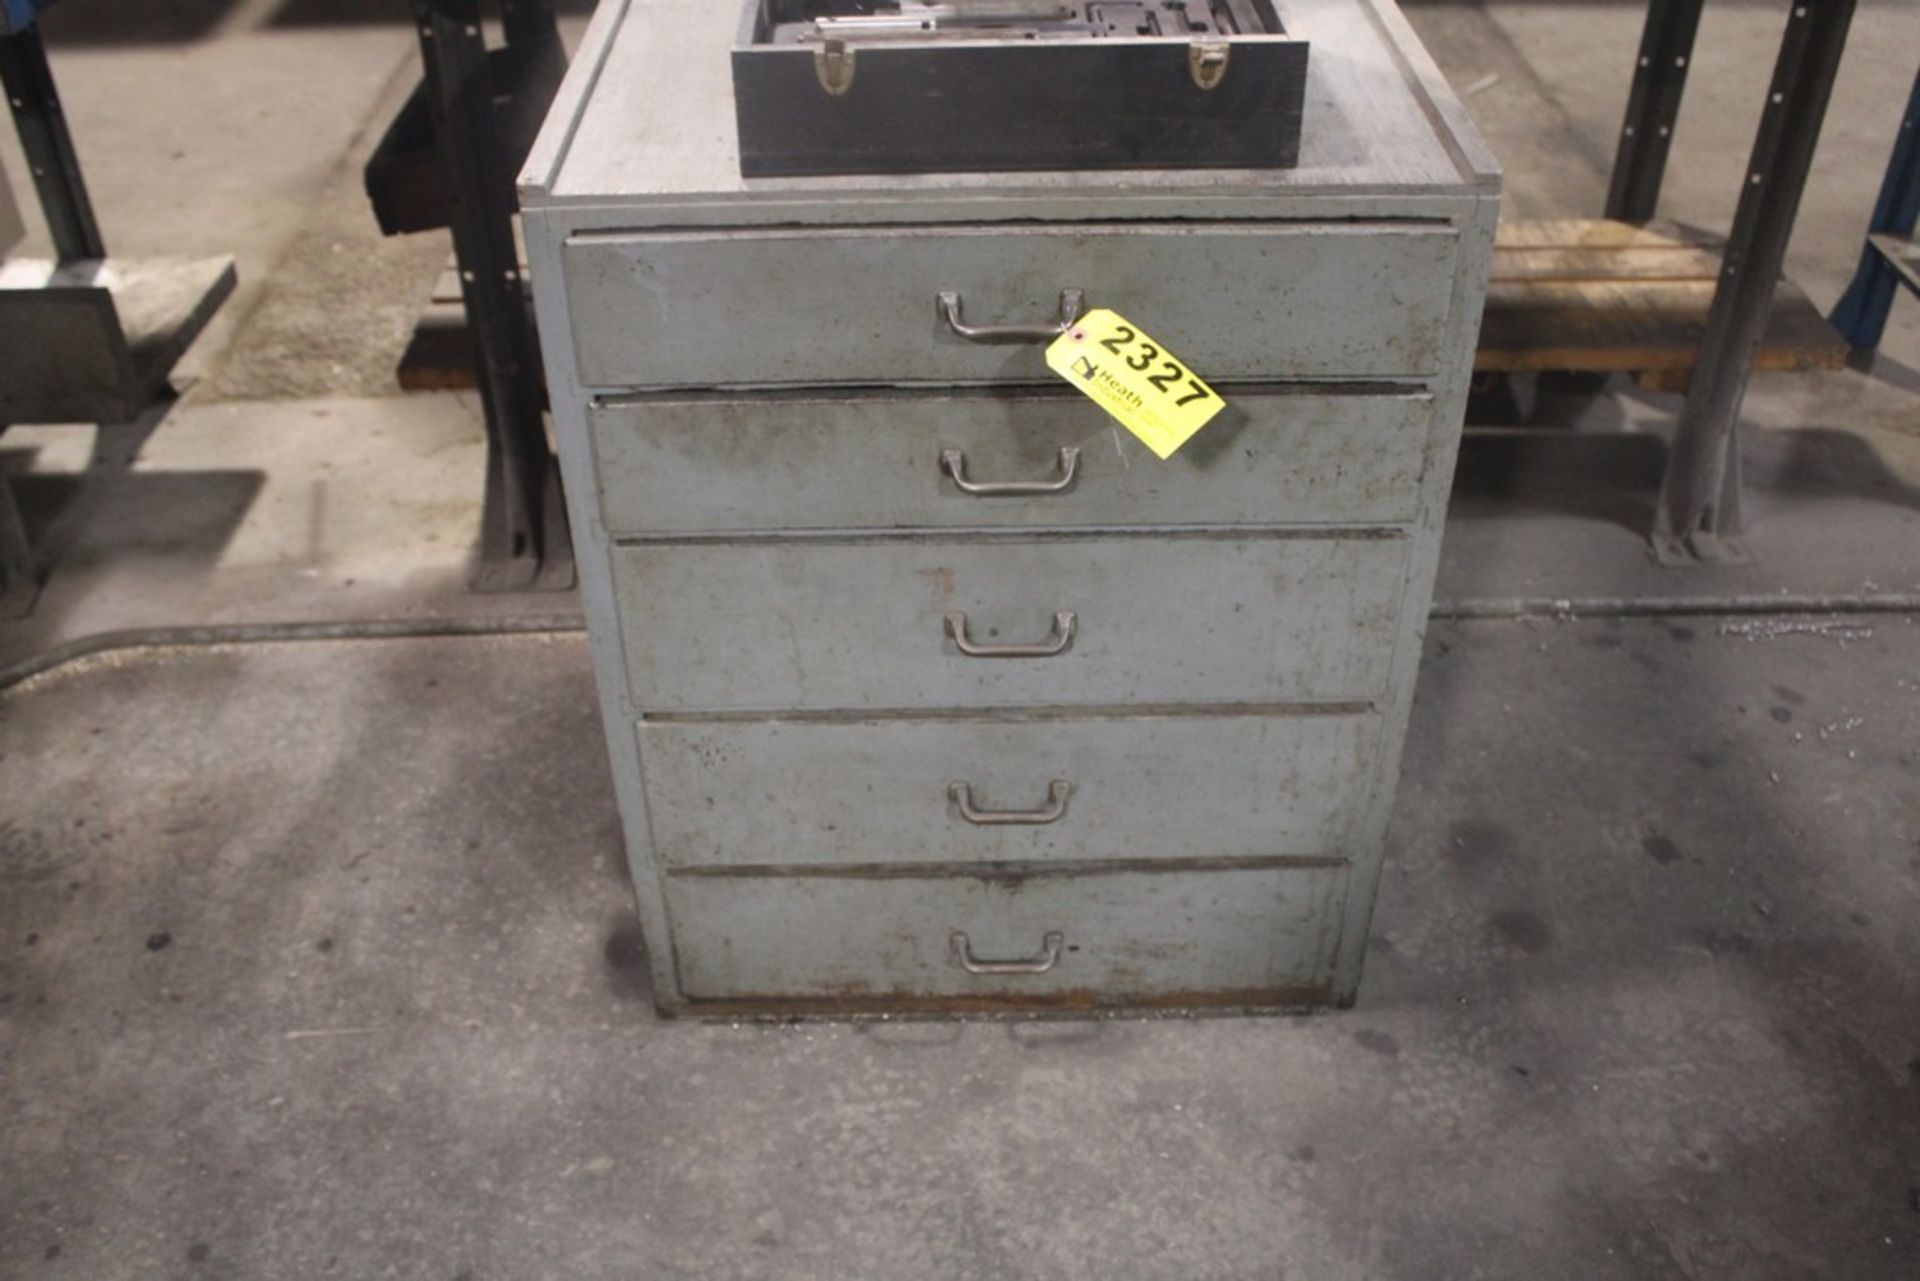 PRATT & WHITNEY TOOL CABINET WITH COLLETS, WRENCHES, HOLD DOWNS